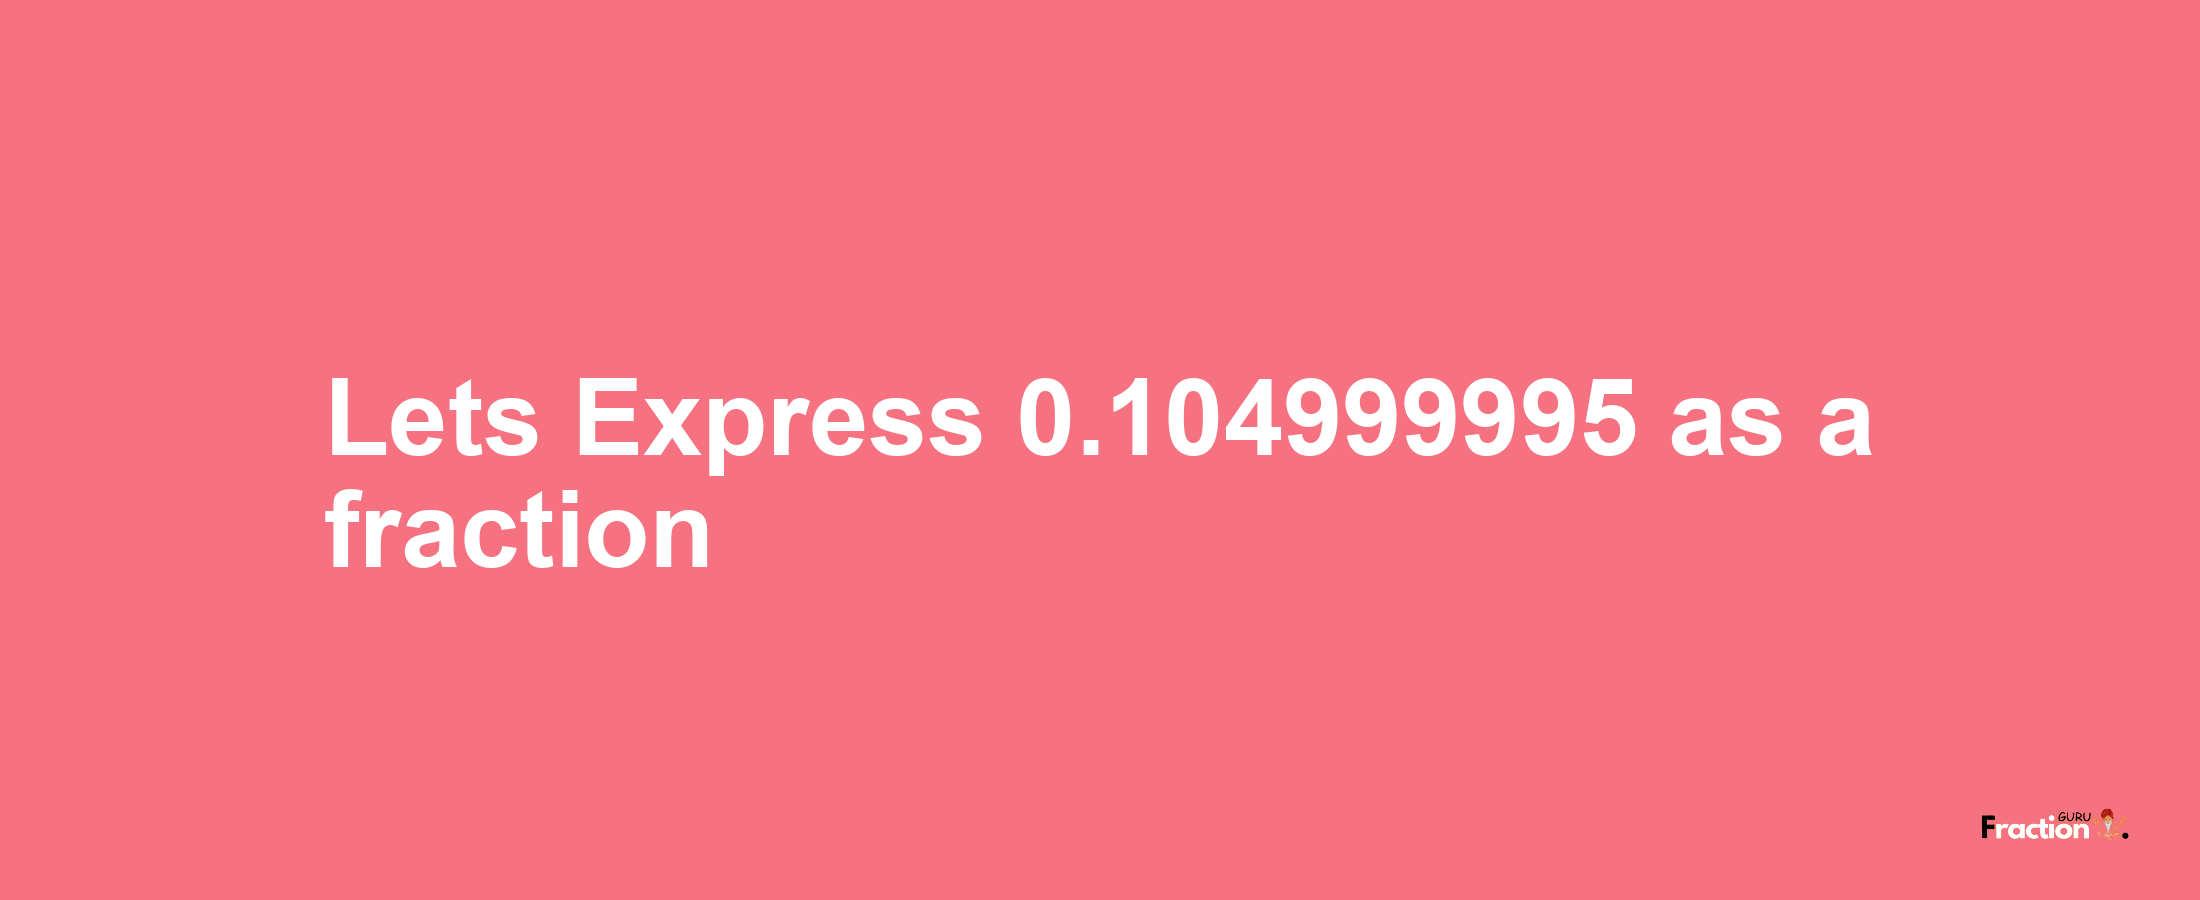 Lets Express 0.104999995 as afraction